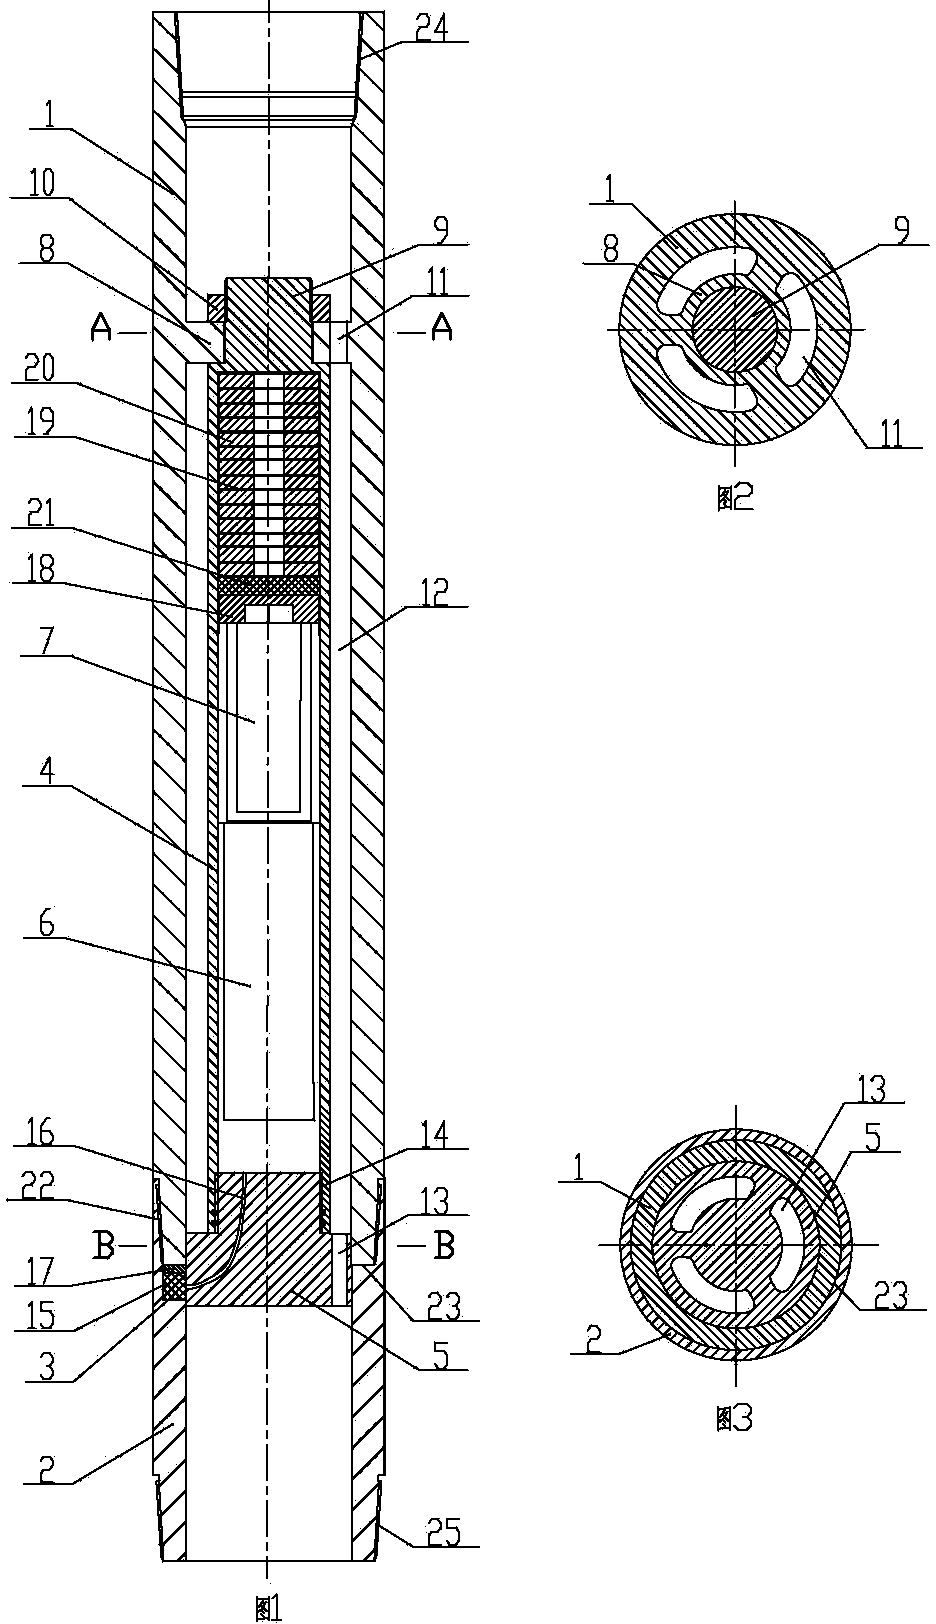 Information while drilling sound wave transmission relay transmitting device